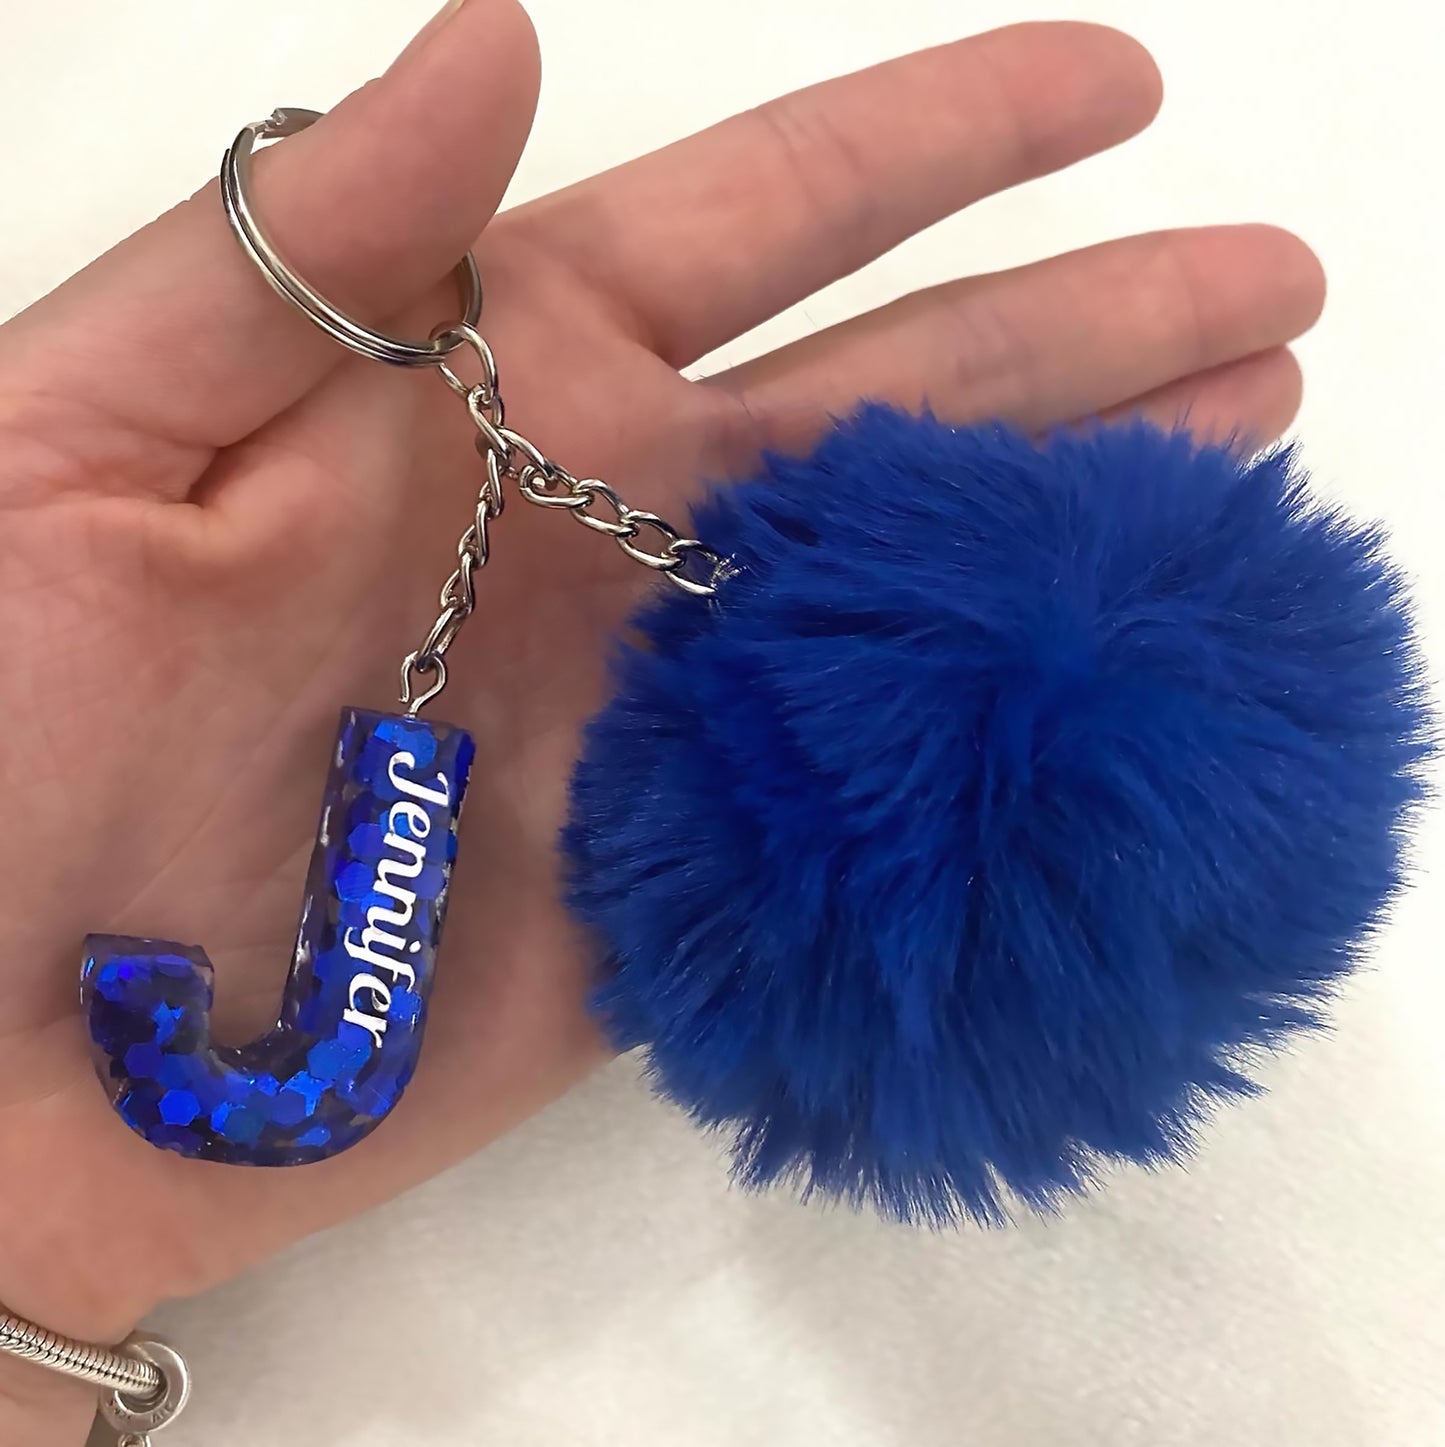 Personalized Resin Keychain, Custom Keychain, Personalized Gift,Kids backpack initial accessory, llaveros personalizados, llaveros